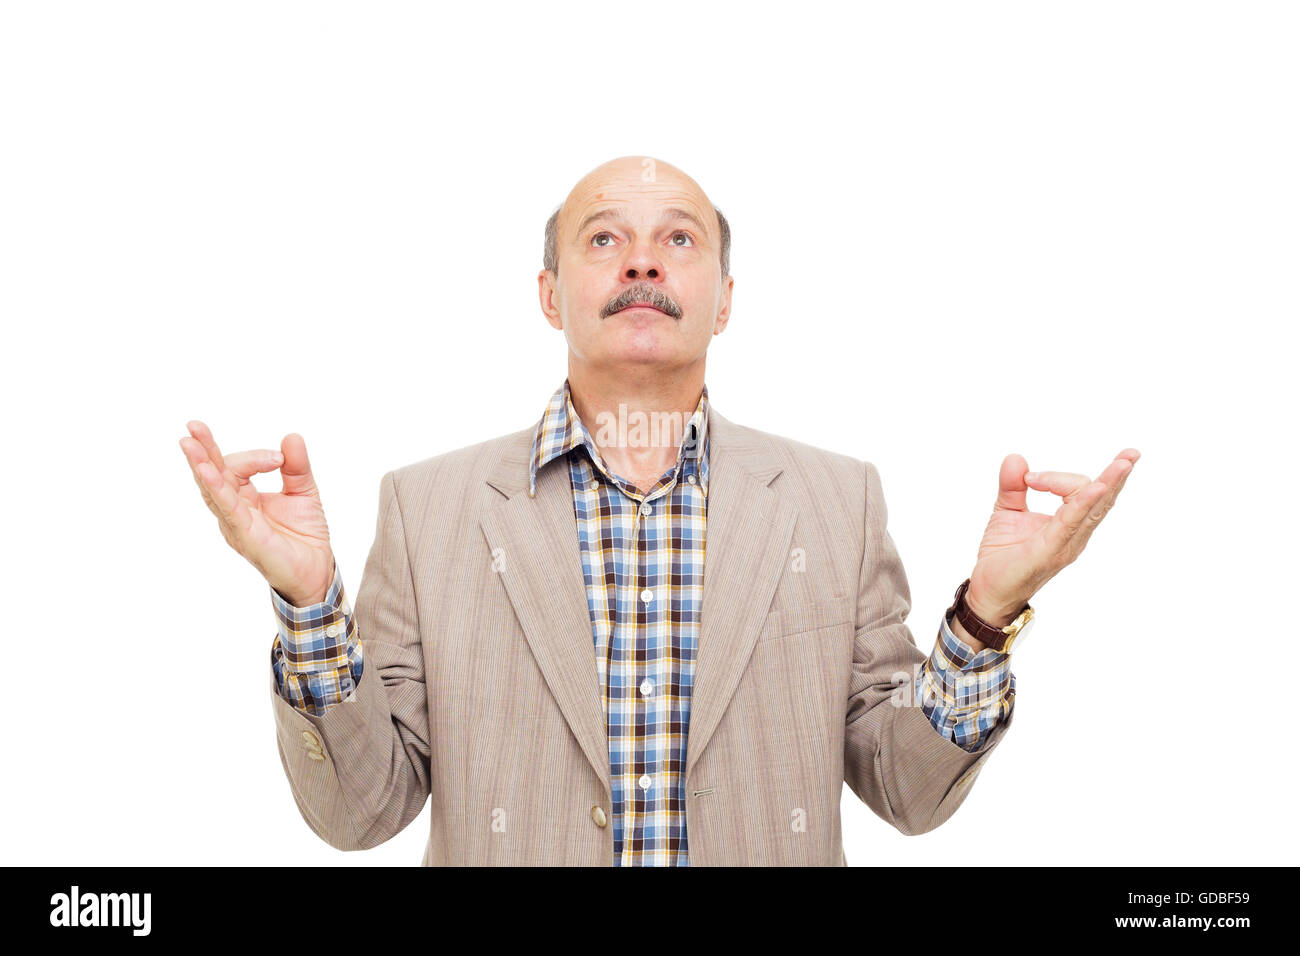 Elderly manager in a business suit meditating. Fingers in form of yoga hand position Stock Photo